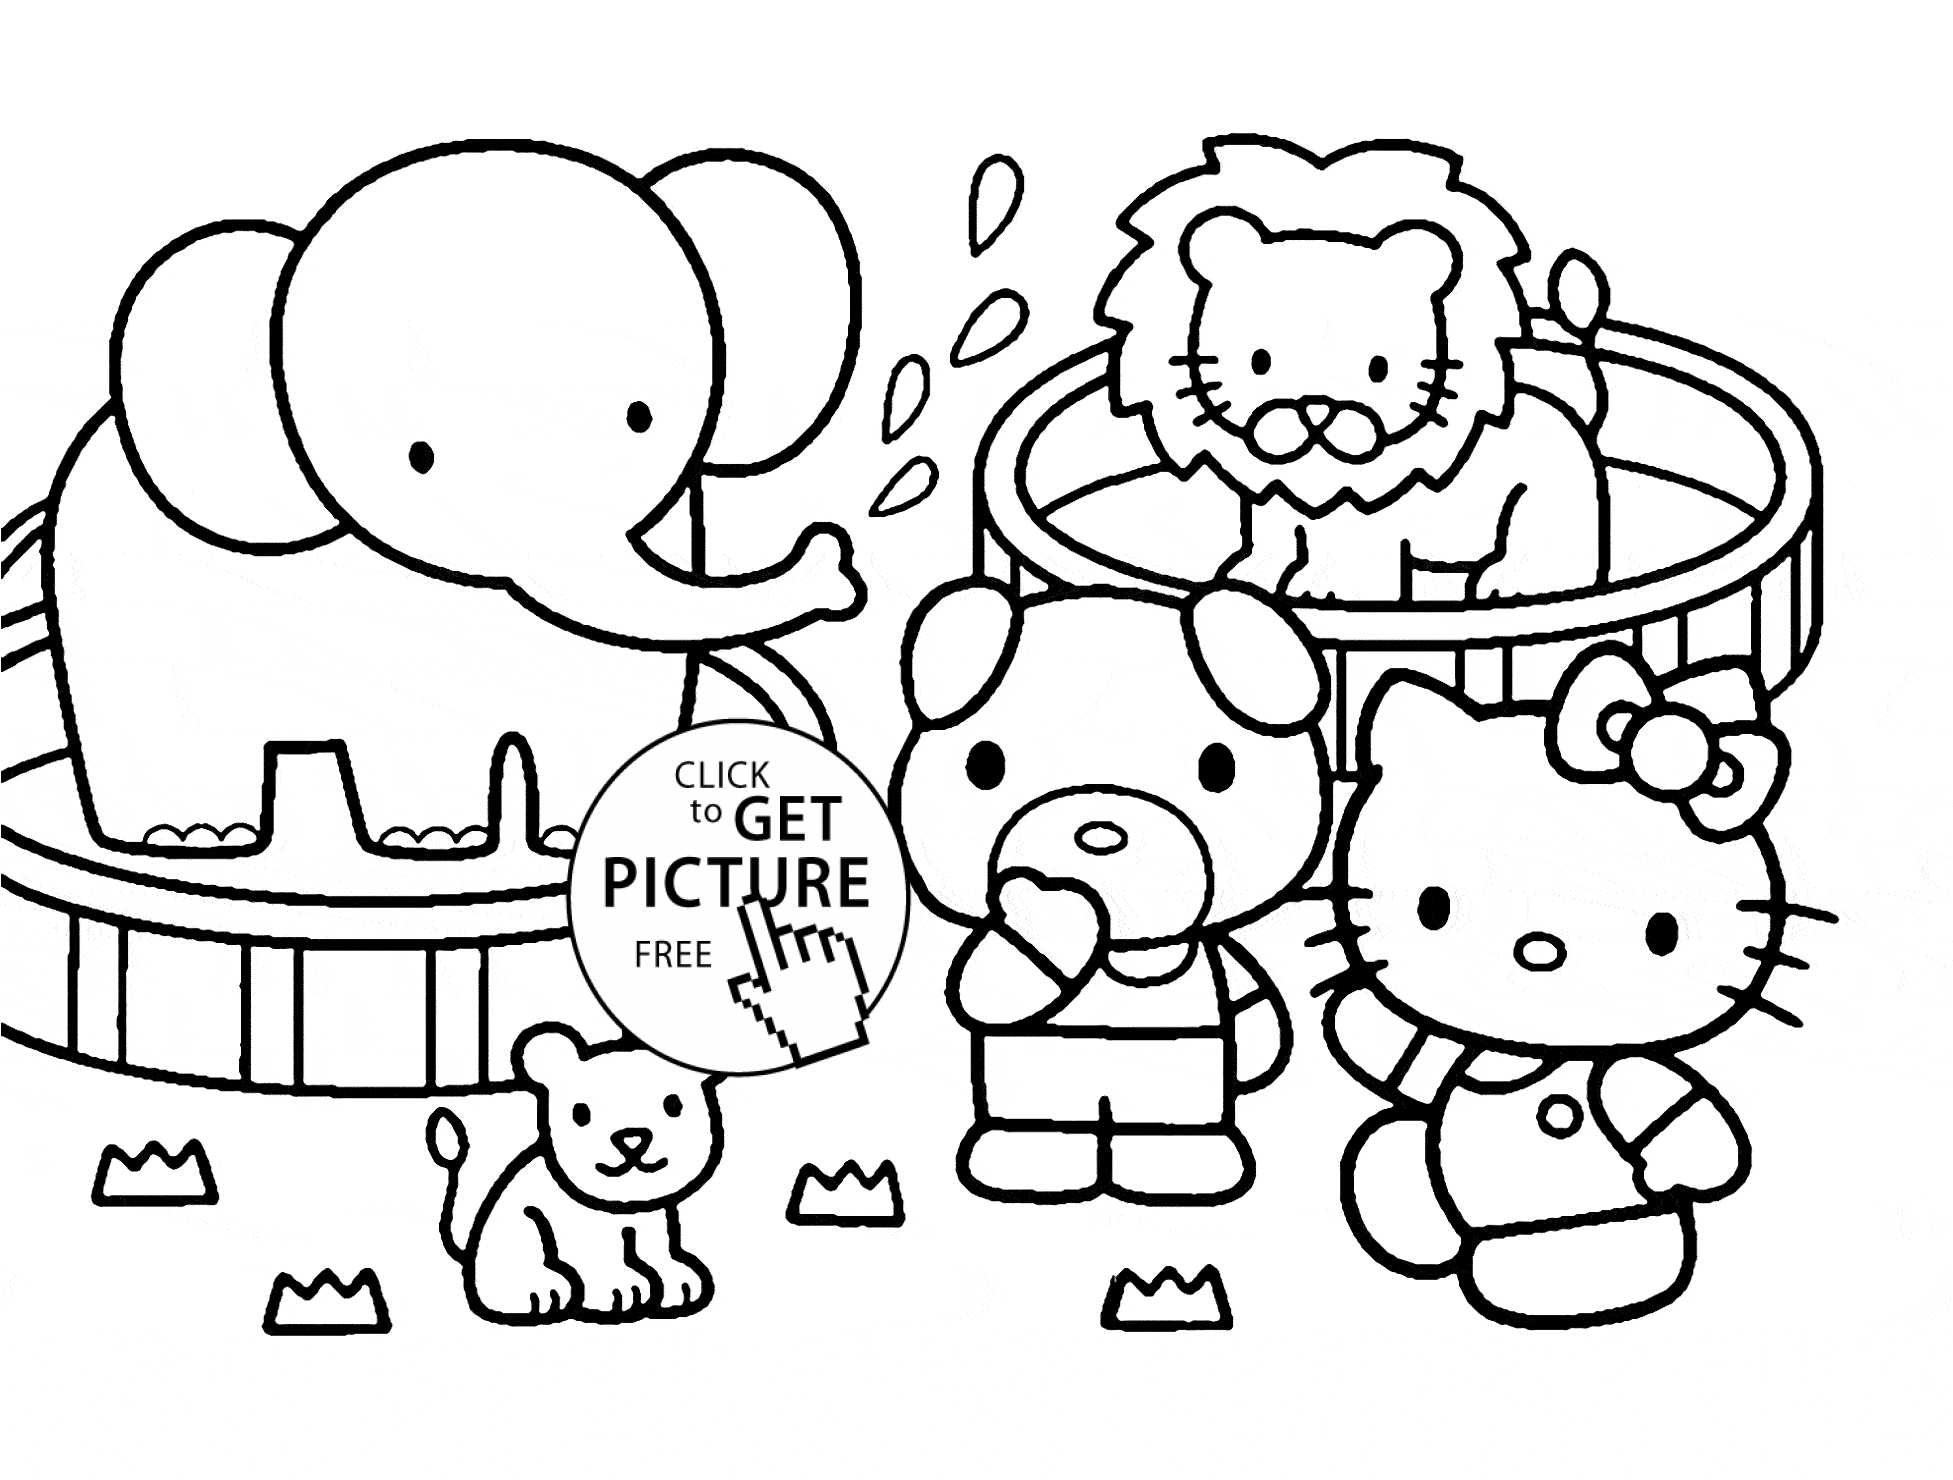 Kitty and zoo animals coloring page for kids, animal coloring ...